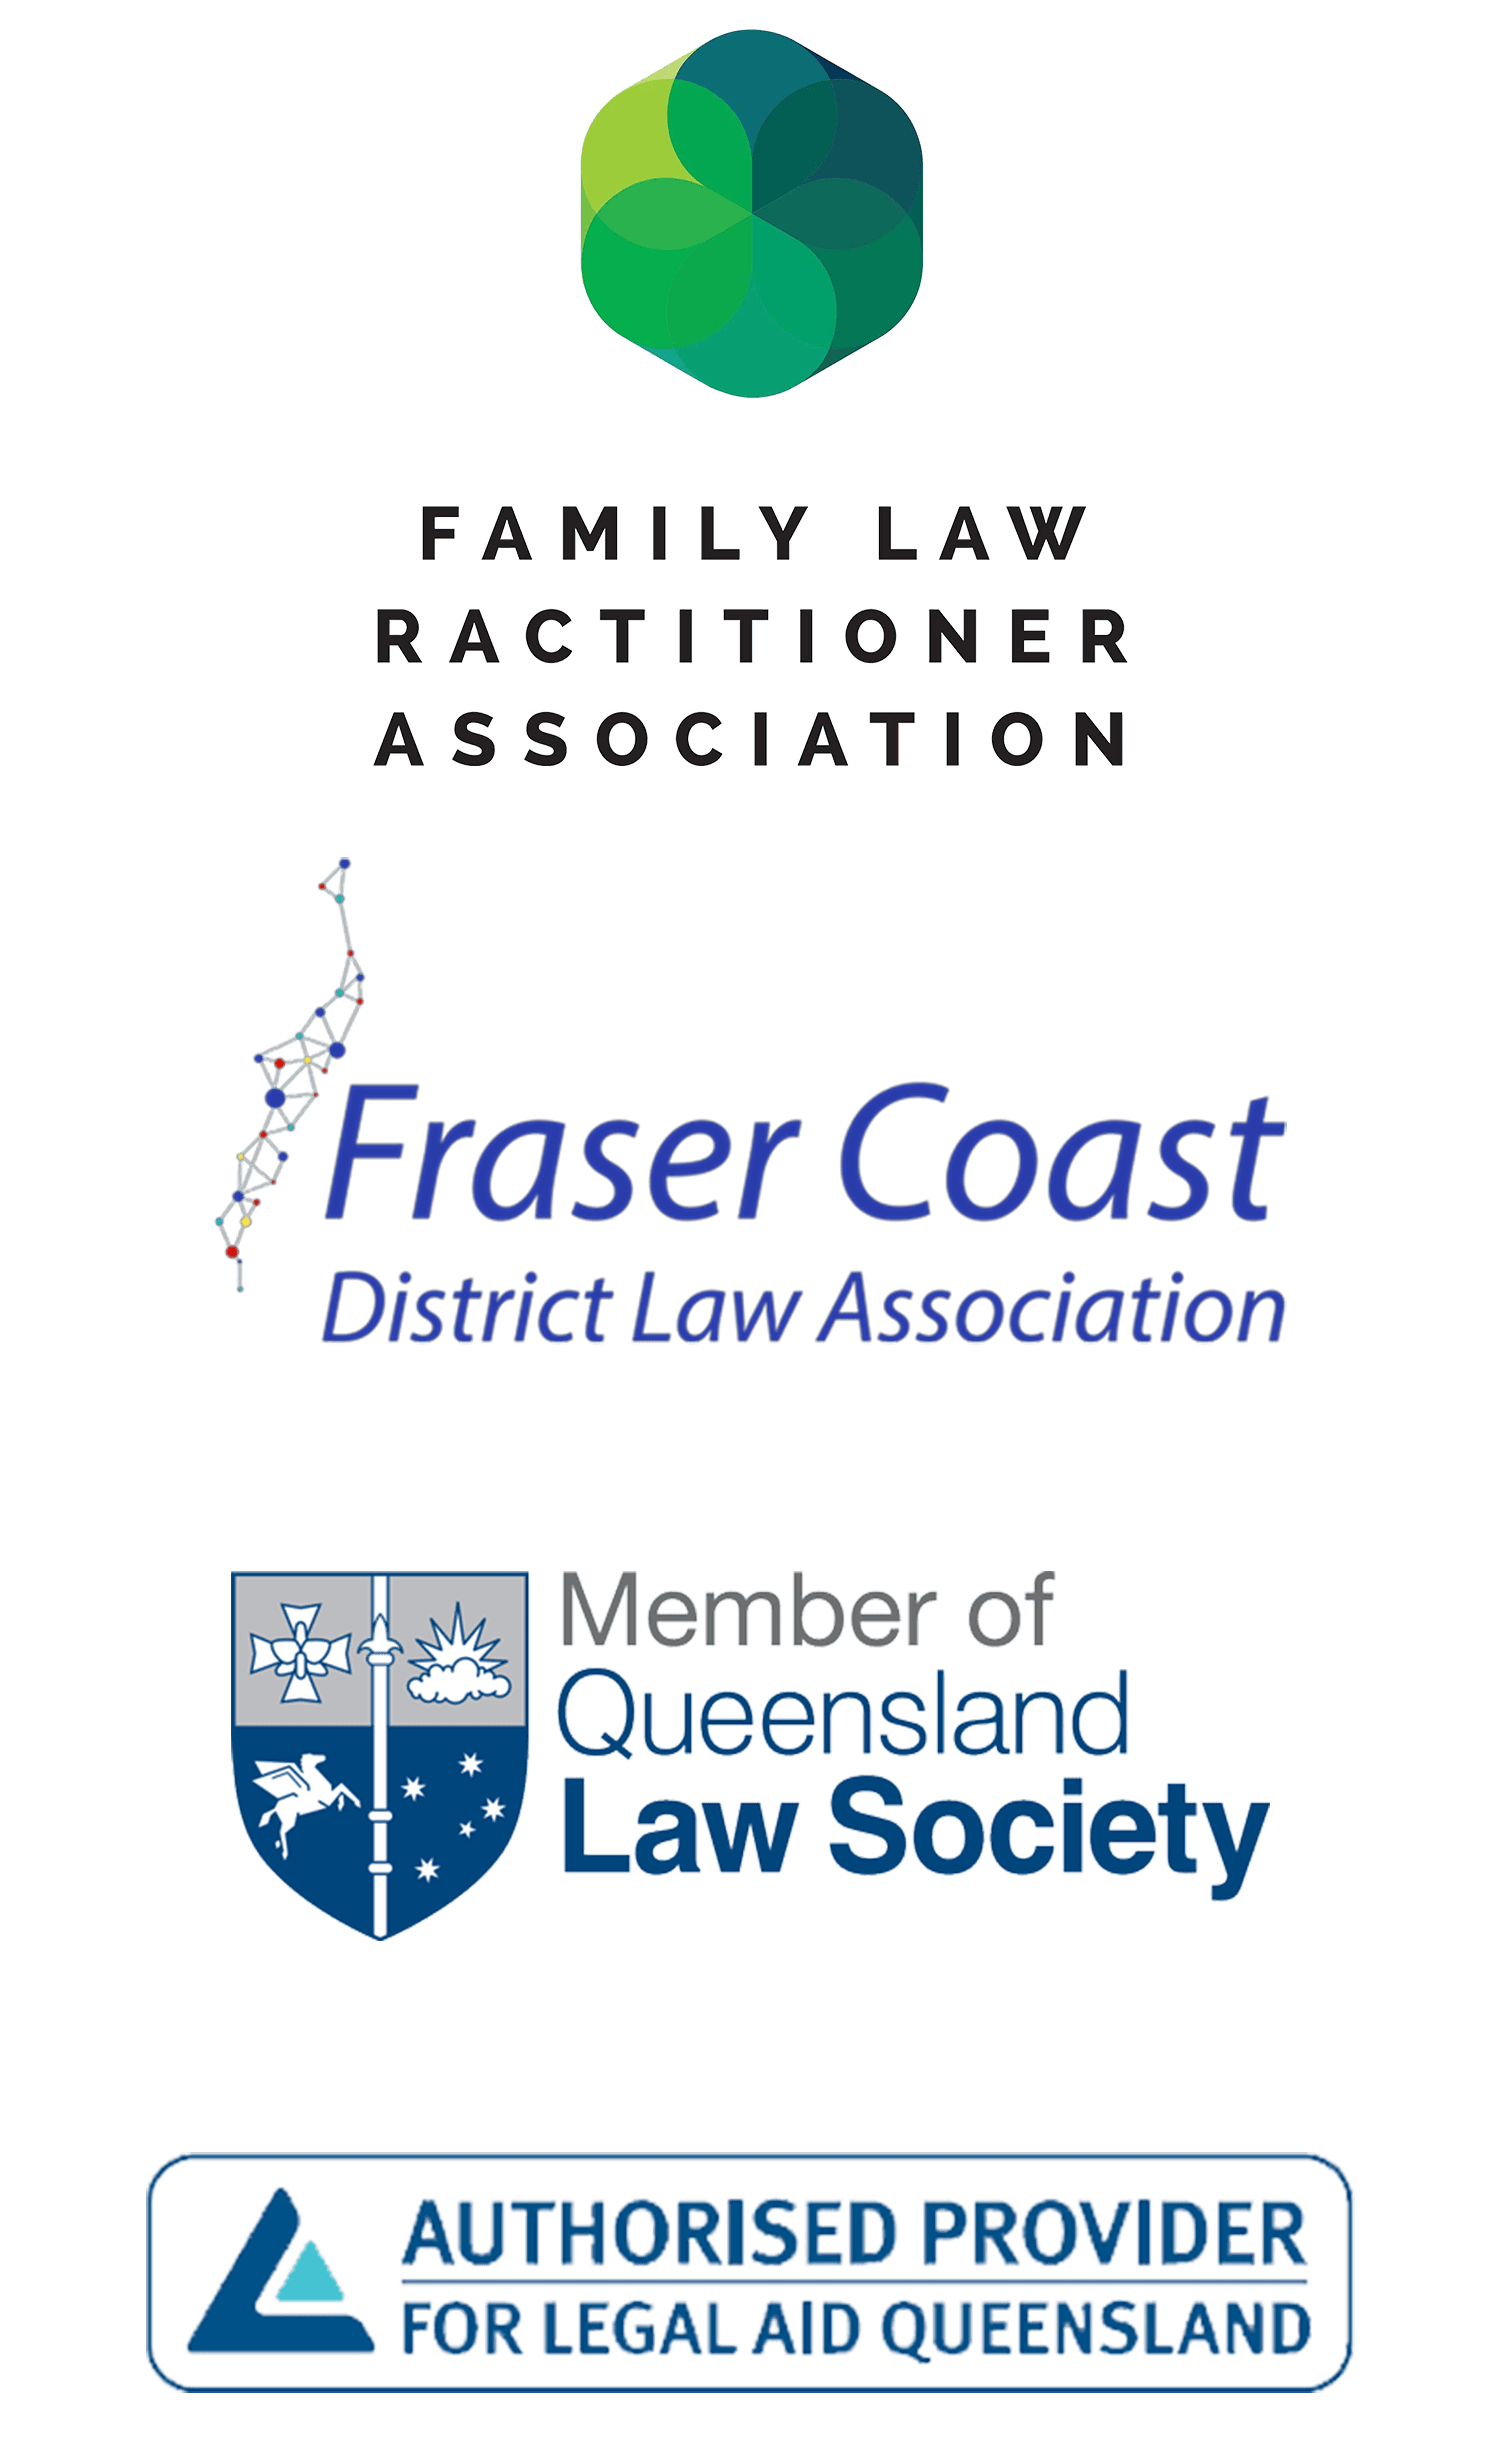 Family Lawyer Hervey Bay Associations our firm is part of